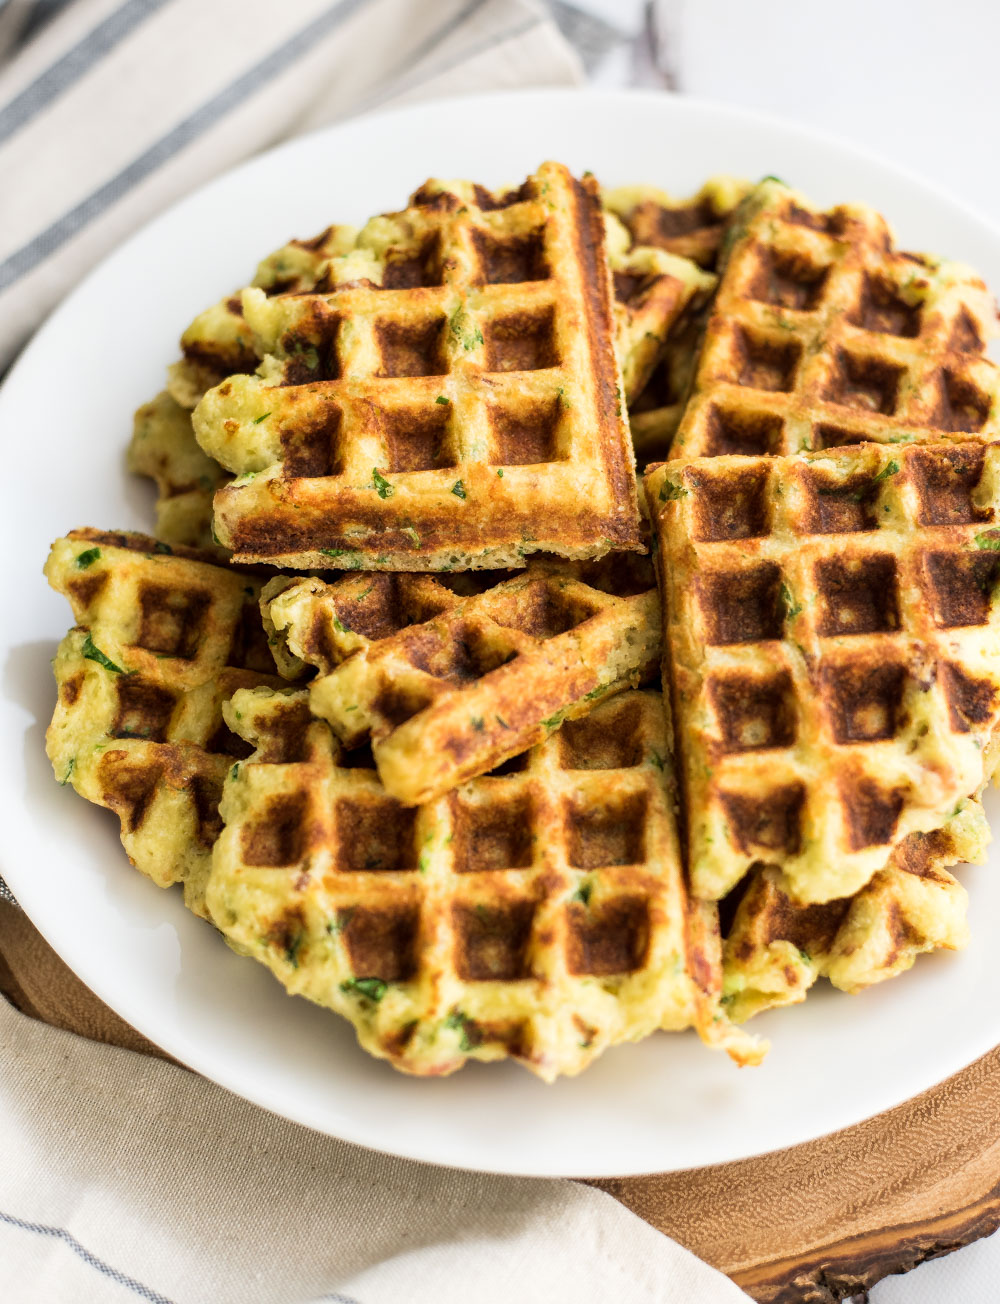 Goat cheese and spinach mashed potato waffles are a great way to use leftover mashed potatoes. They make a great side dish or bite-sized snack!